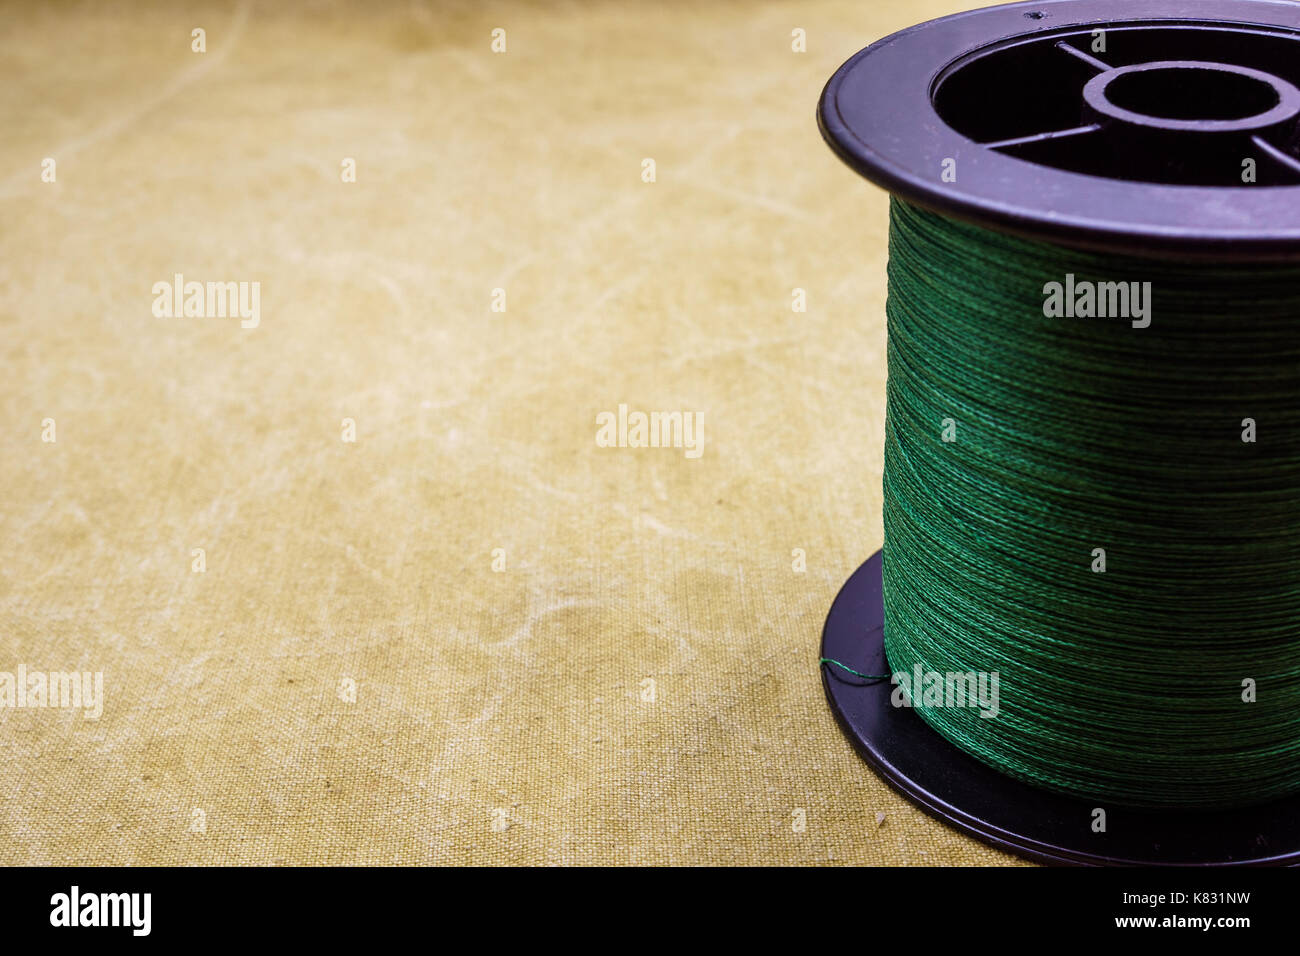 https://c8.alamy.com/comp/K831NW/spool-of-cord-on-the-background-of-tarpaulin-green-fishing-line-on-K831NW.jpg